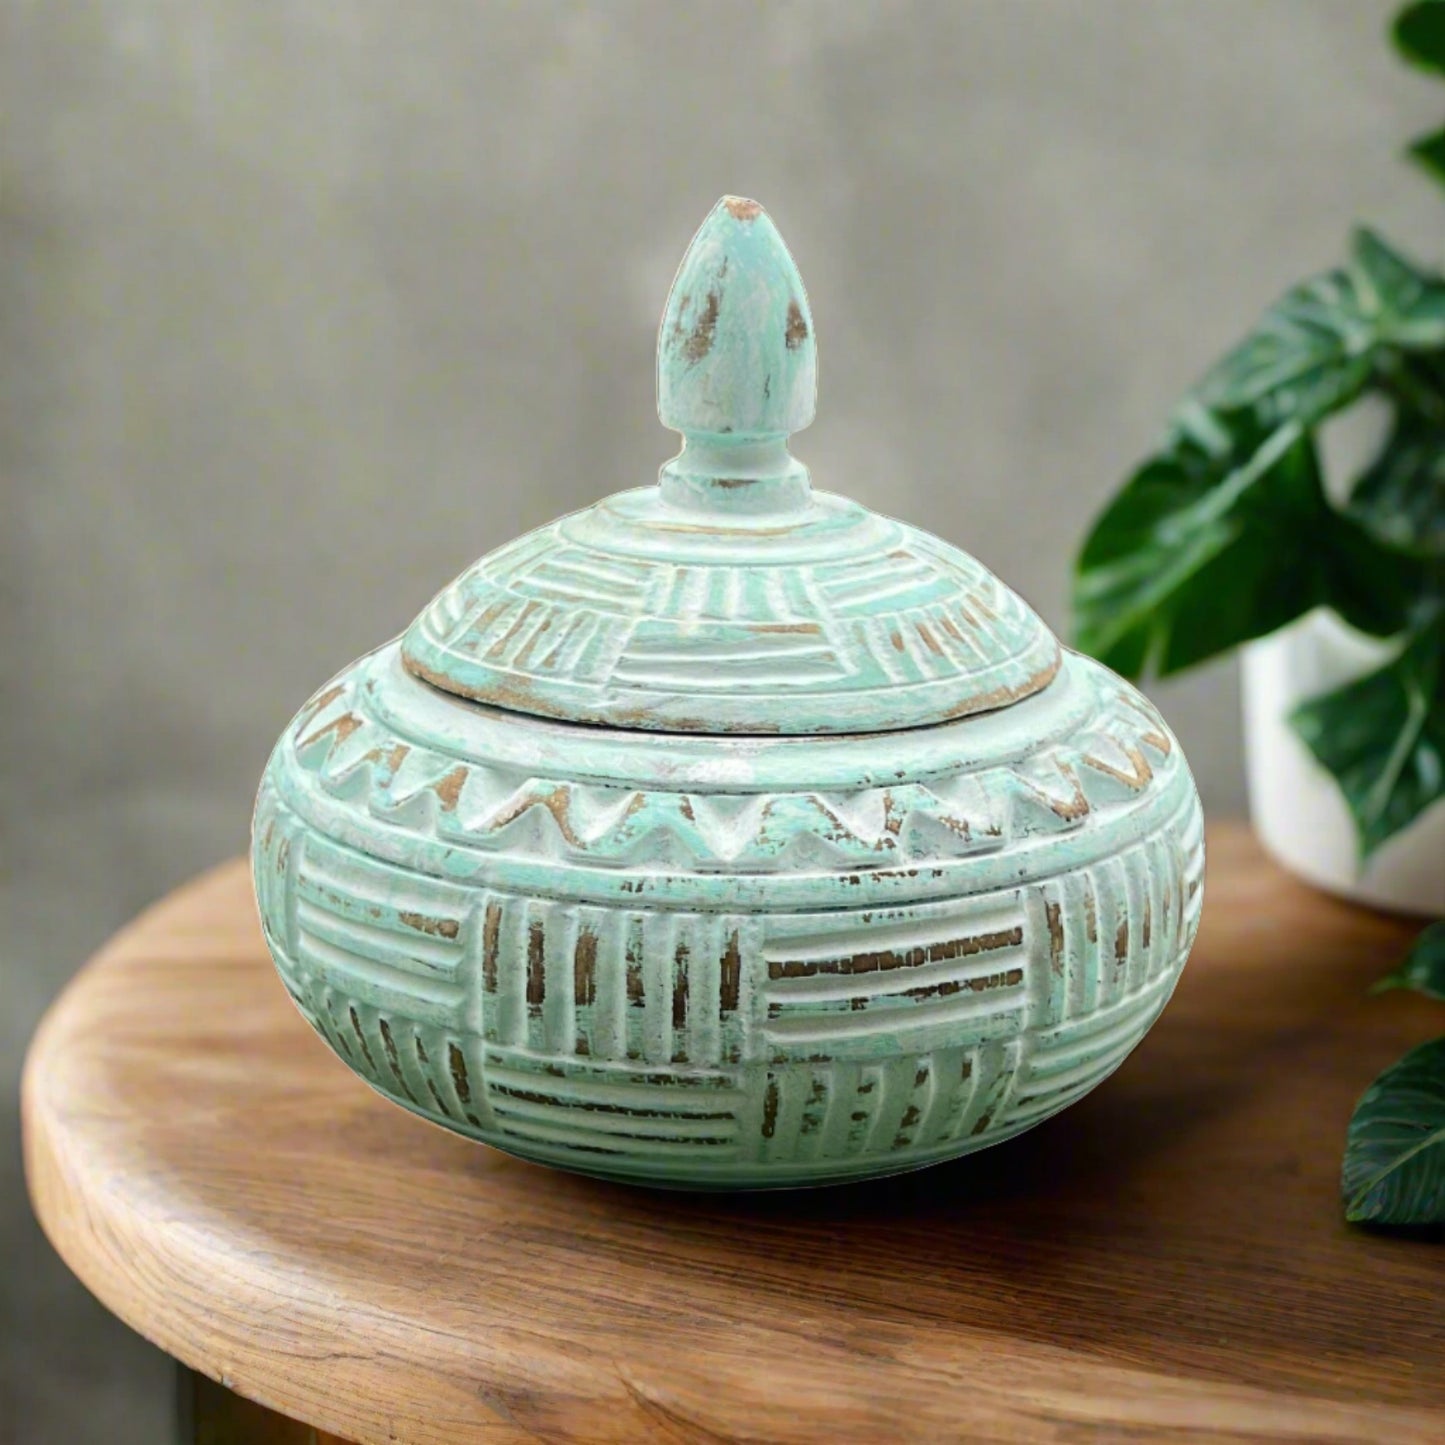 Carved Decor Pointed Bowl